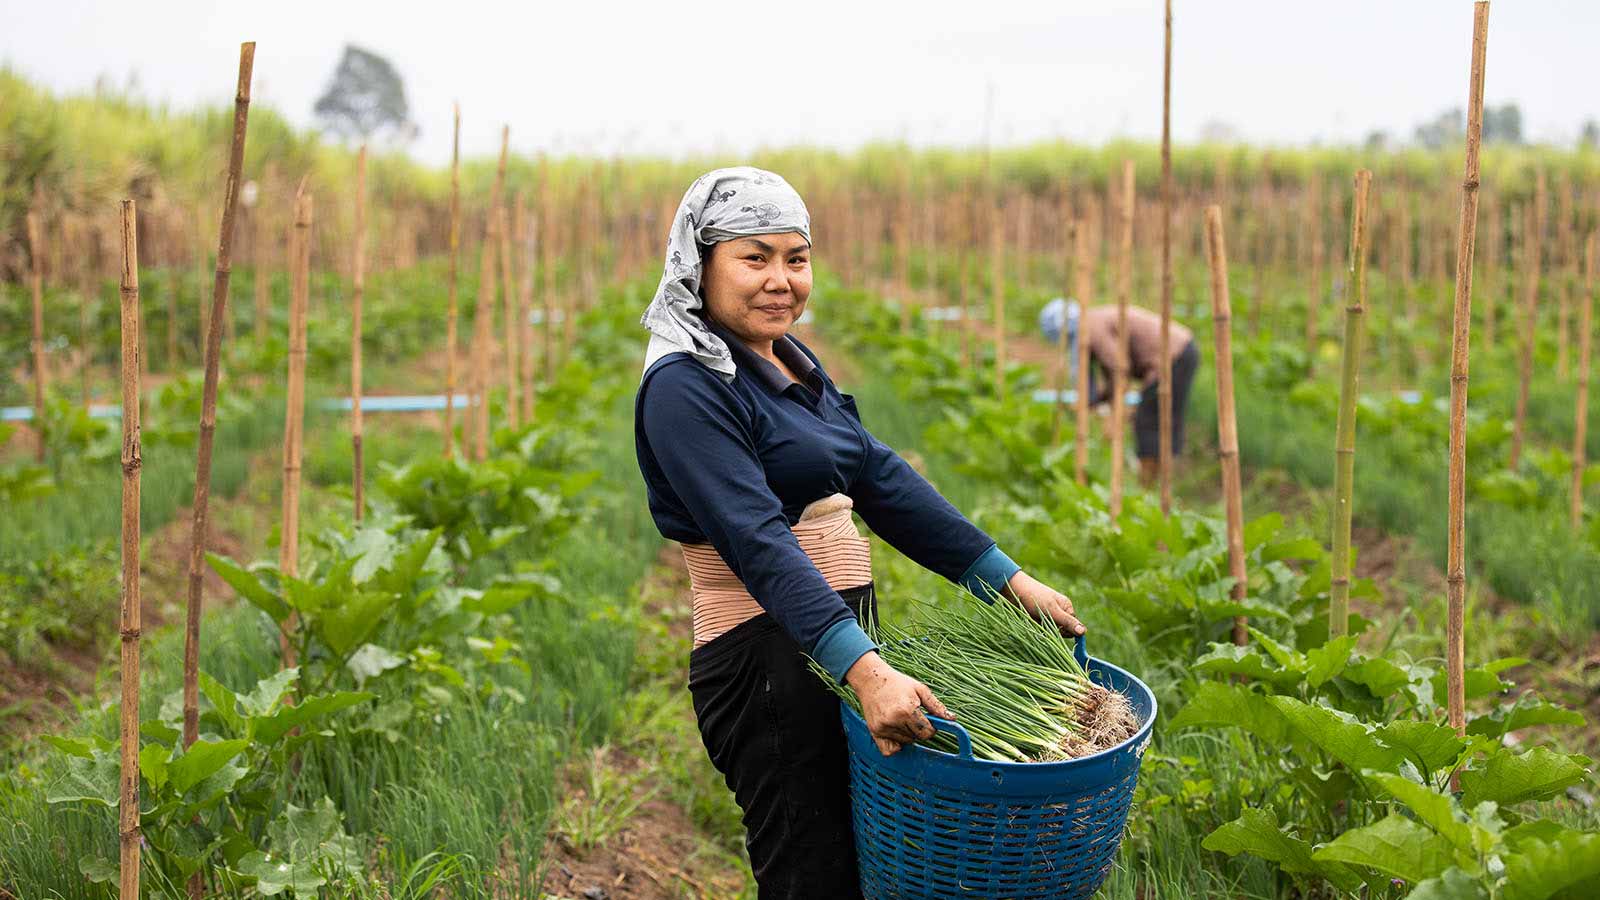 Group of Asian women farmers harvesting onions on a farm in the countryside of Thailand.